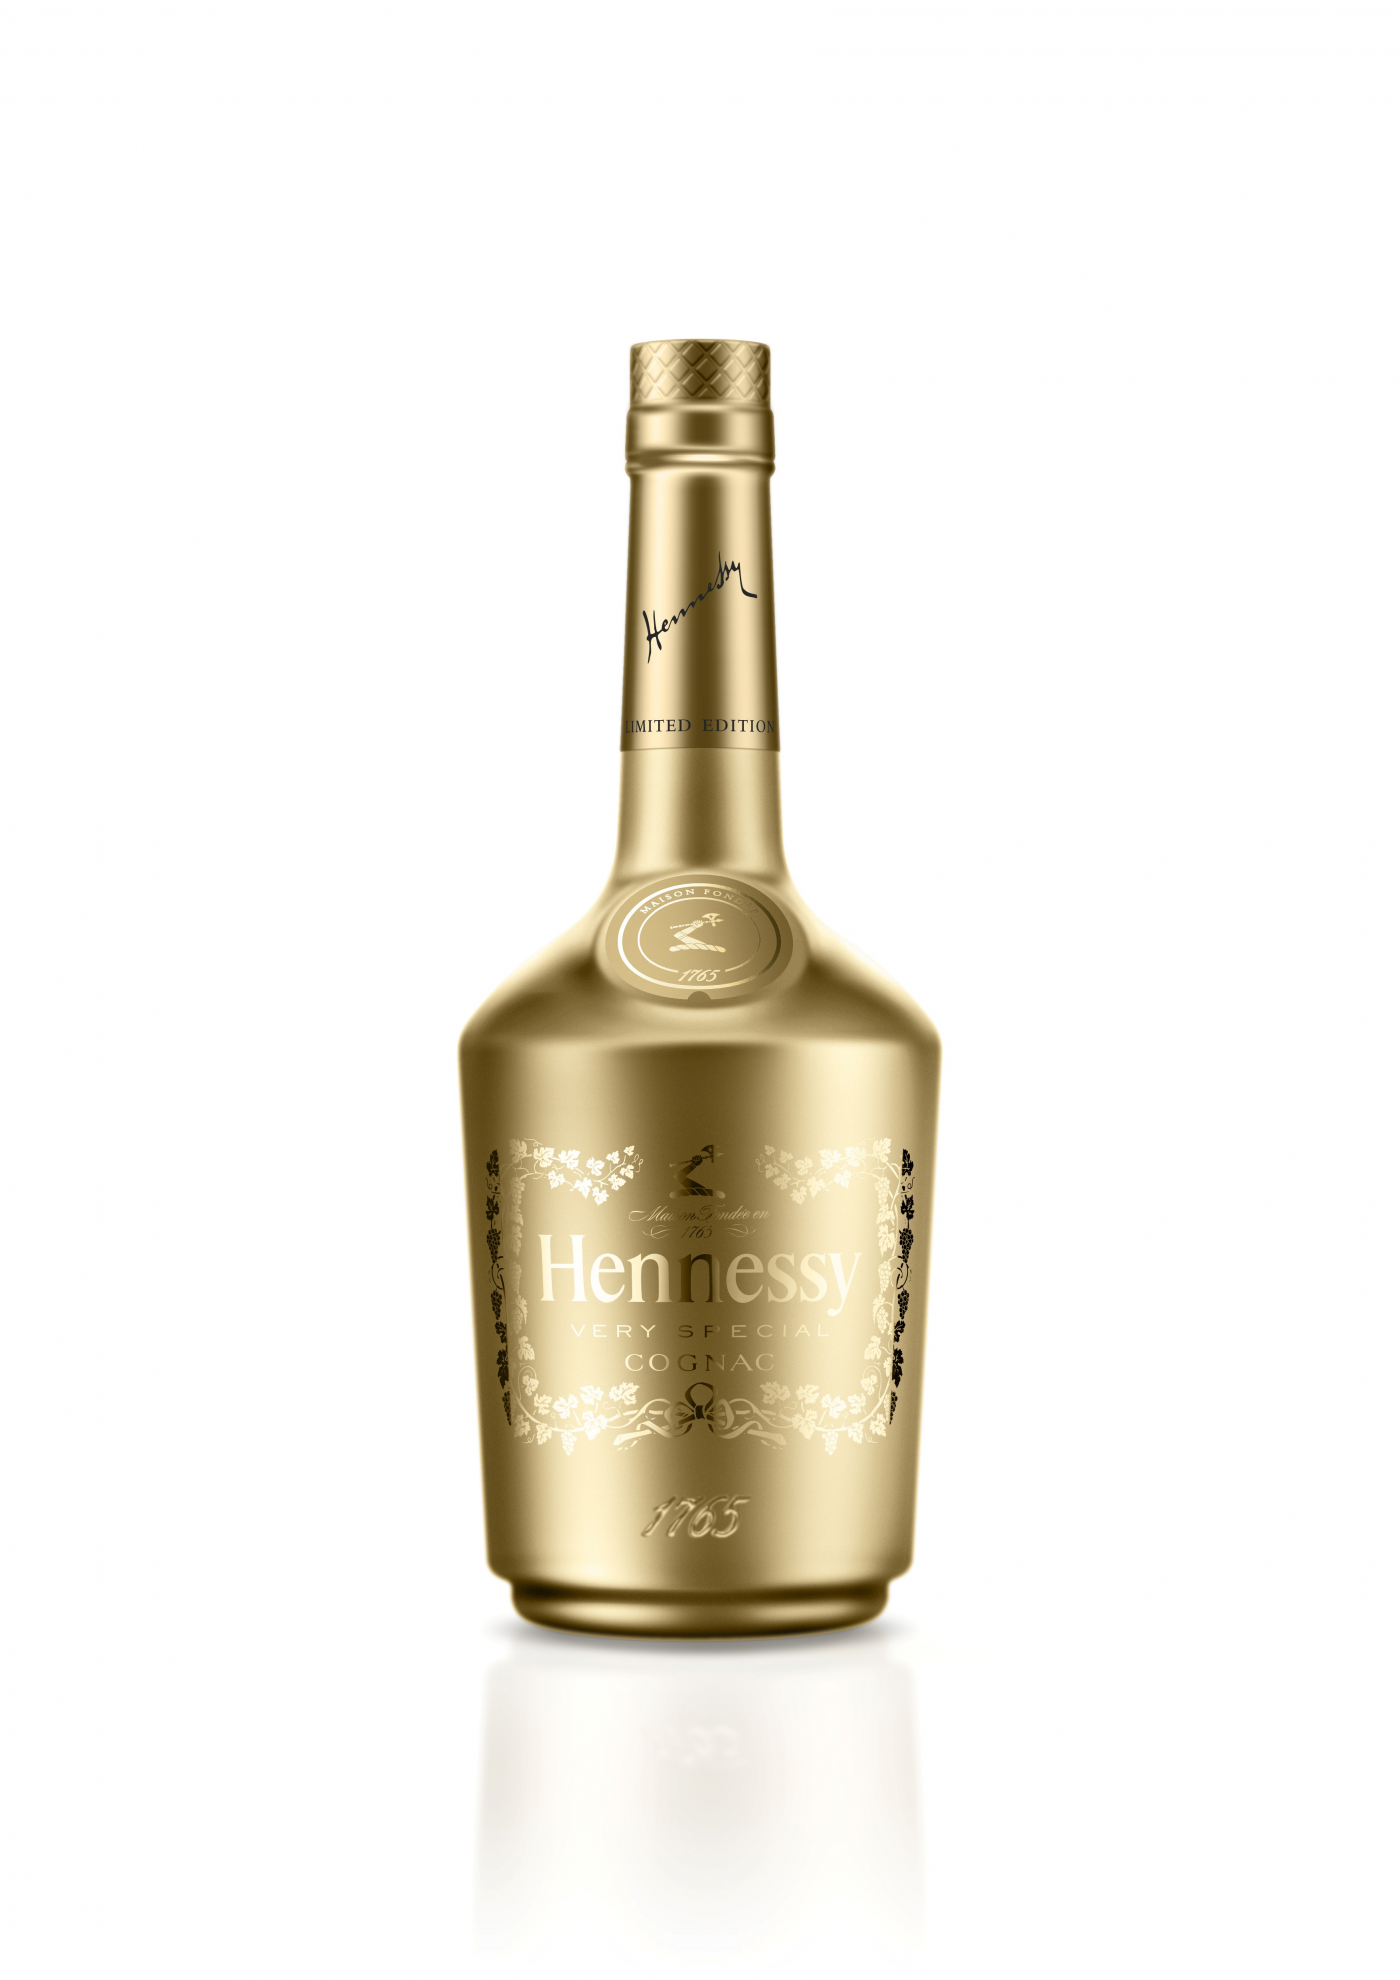 HENNESSY bottle on whiteveryhigh-width-9500x-prop-png